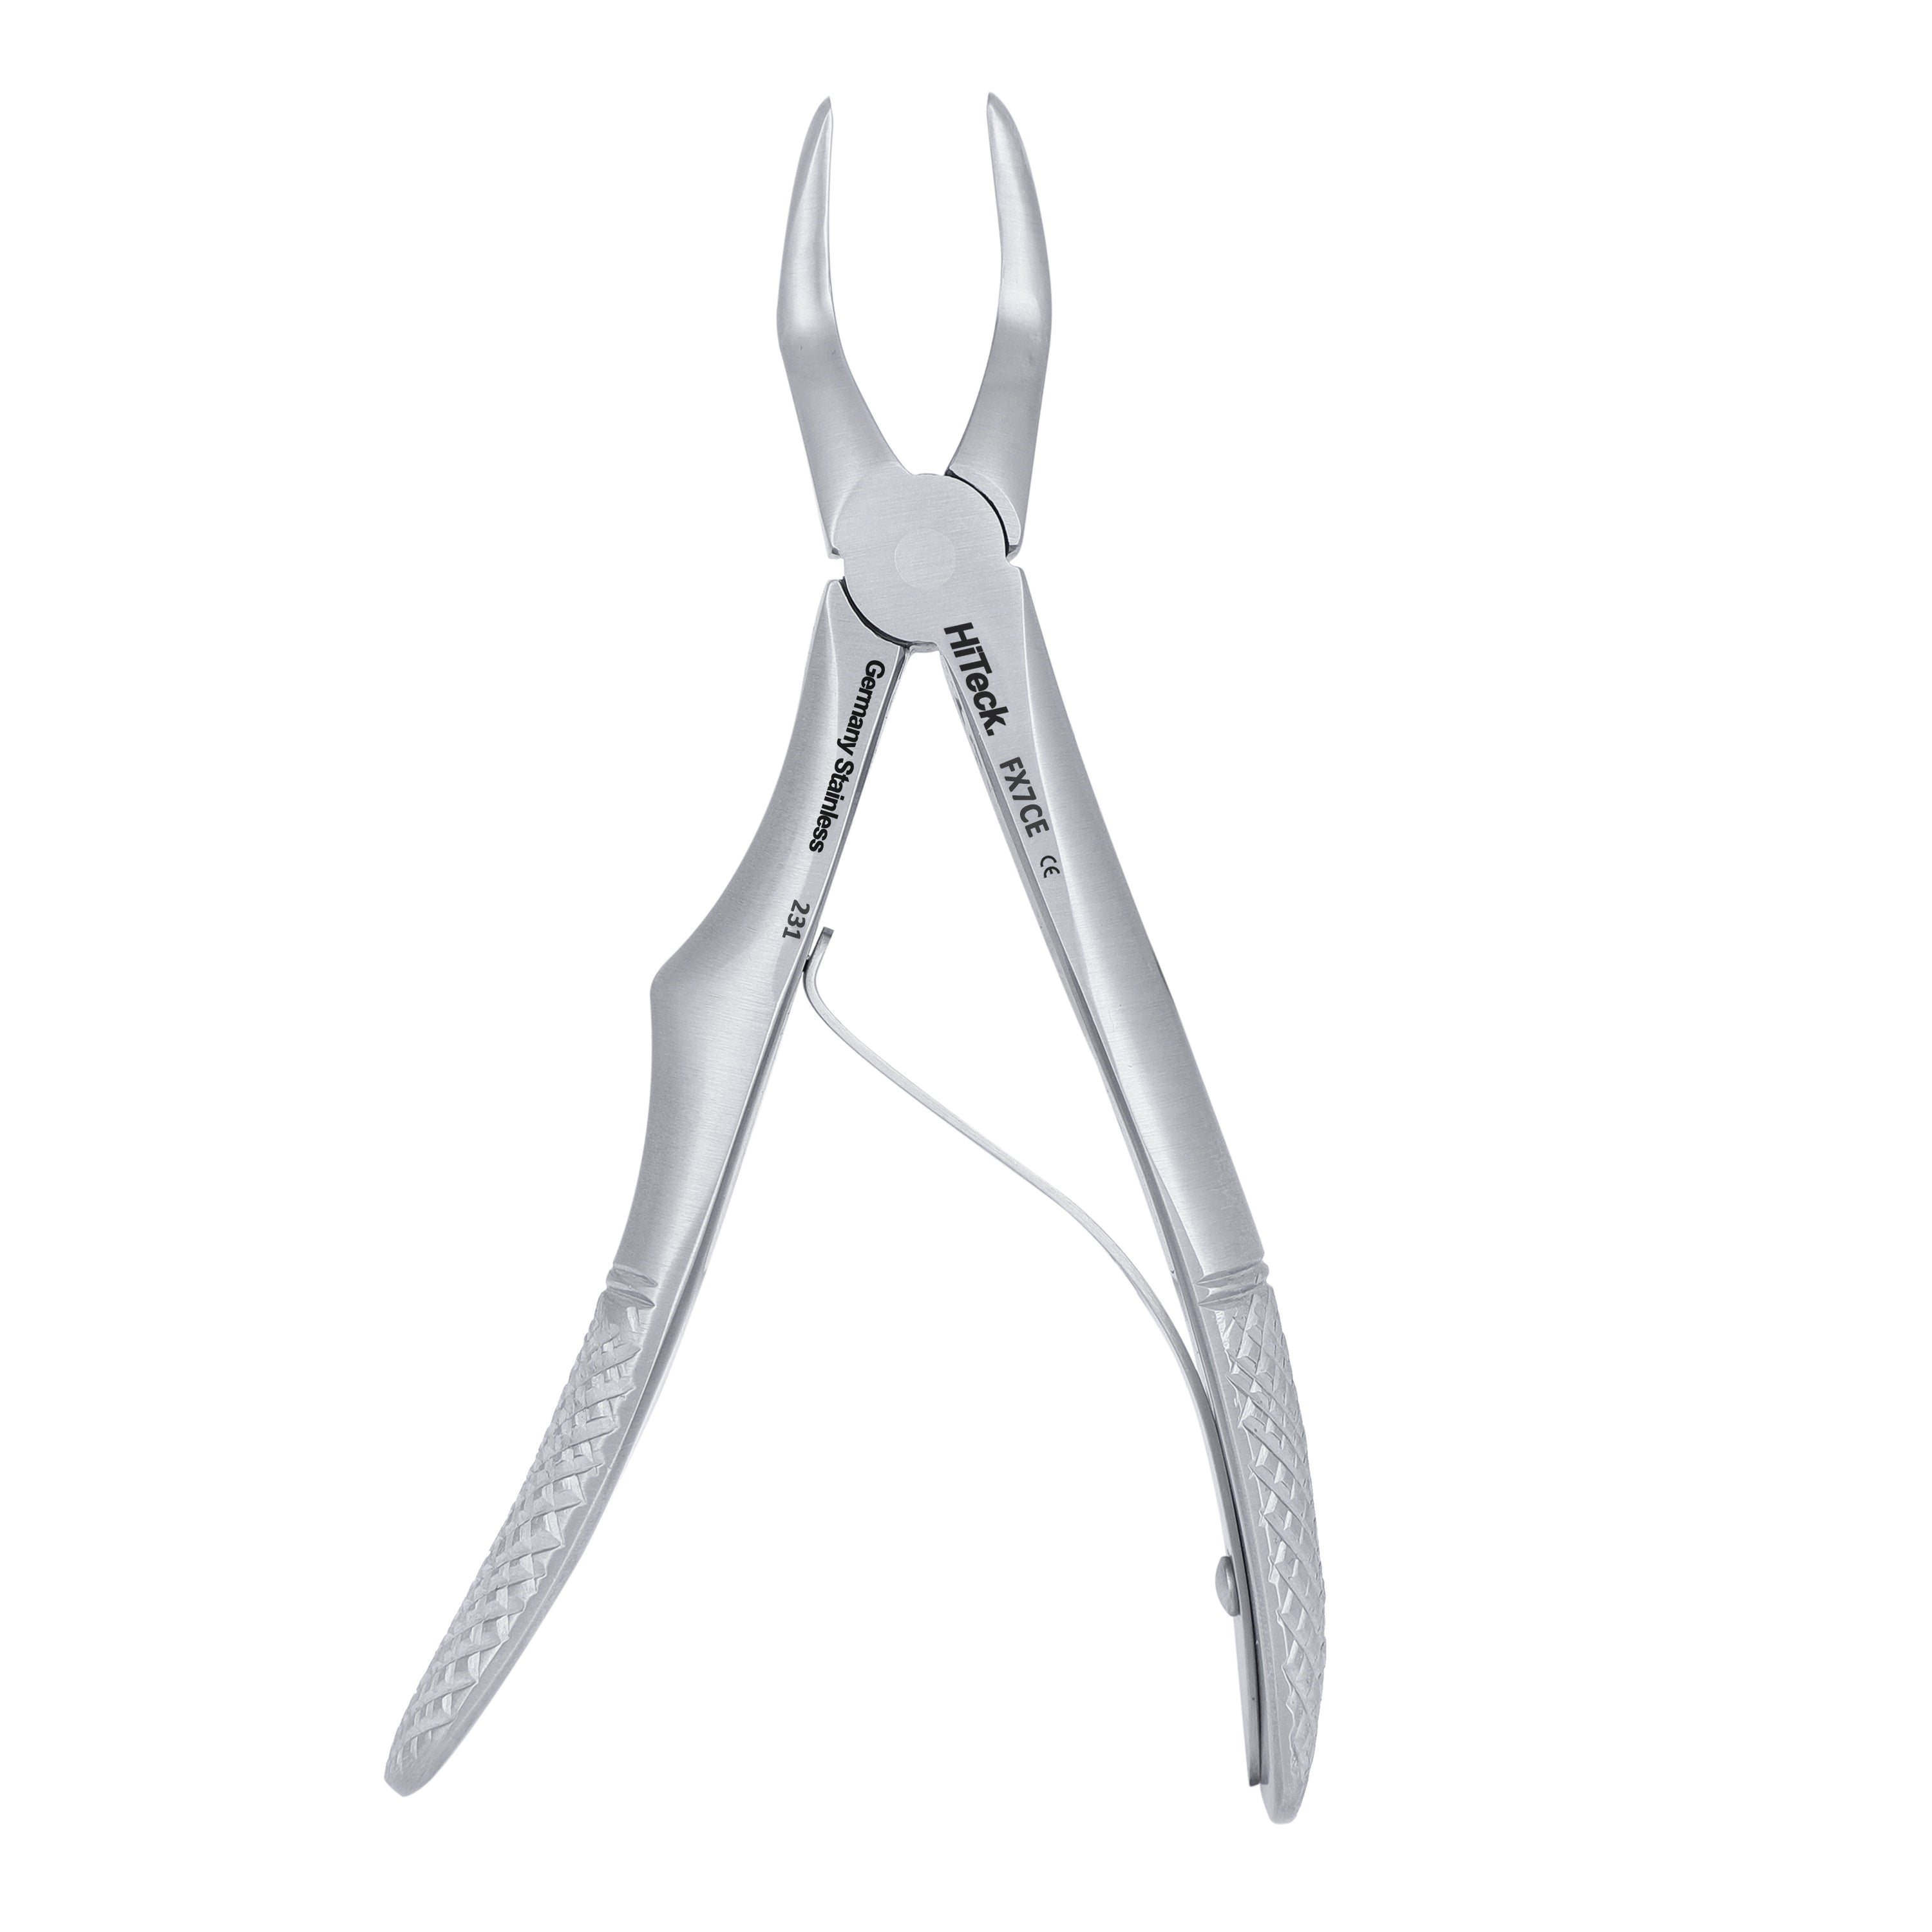 7C Pedo Upper Roots English Extraction Forcep - HiTeck Medical Instruments